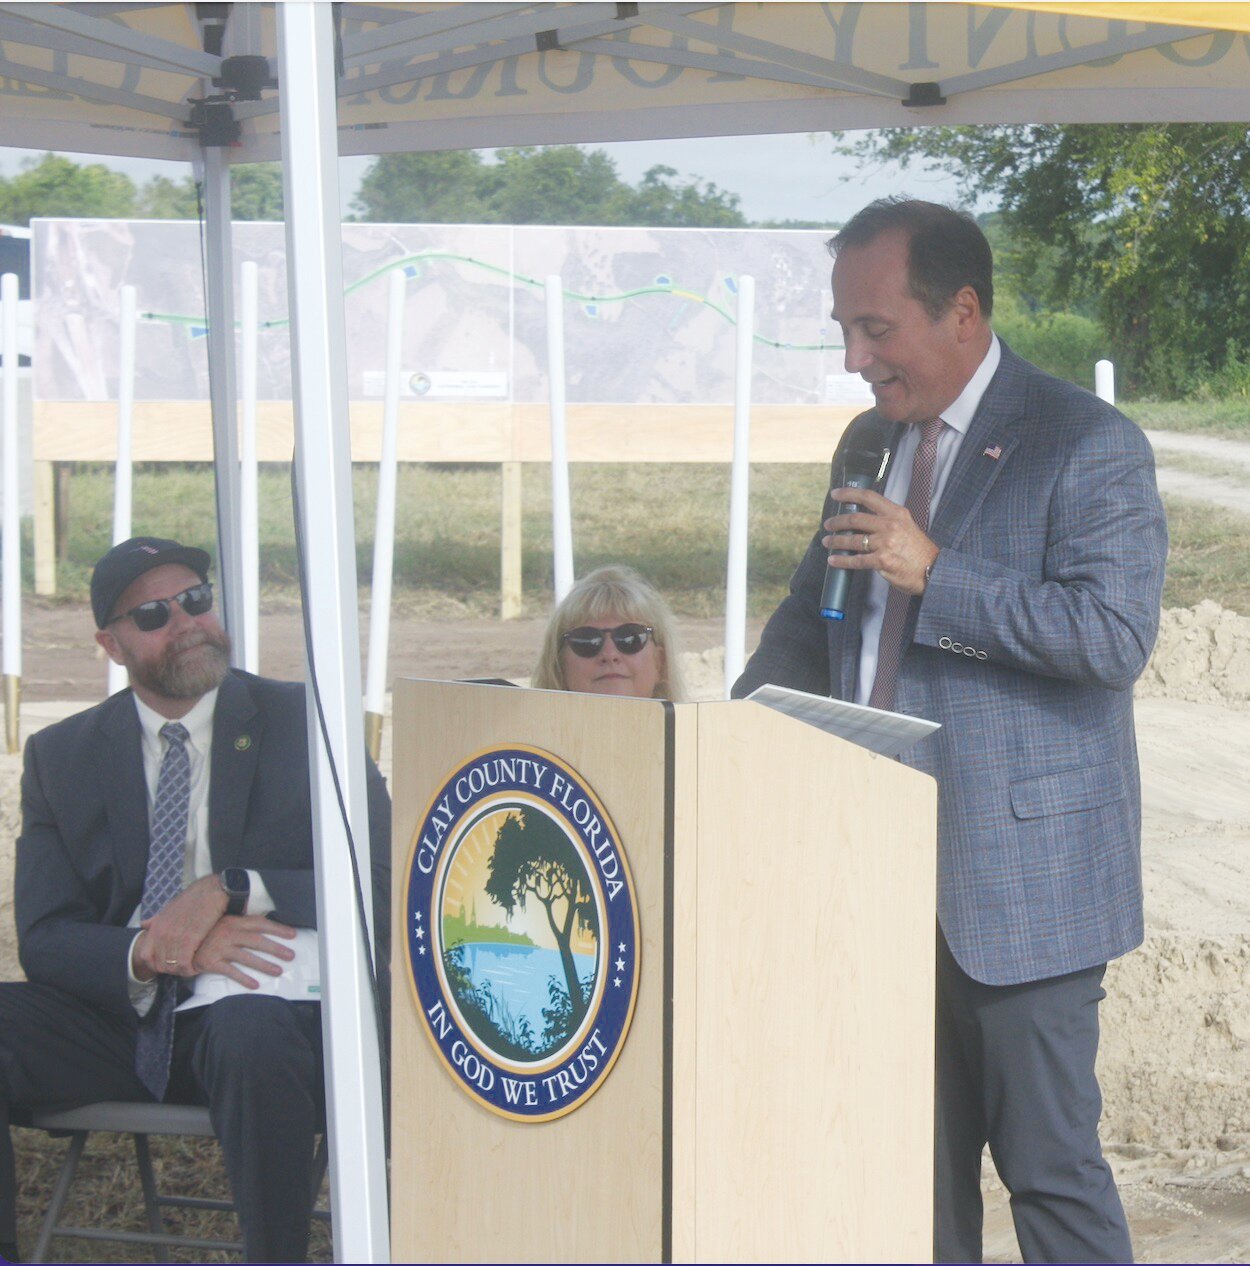 County Manager Howard Wannamaker, who was a critical piece in completing project plans, gave his thoughts on the historic new road that will give drivers a critical, key connection throughout the county and protect sensitive wetlands by utilizing a bridge.